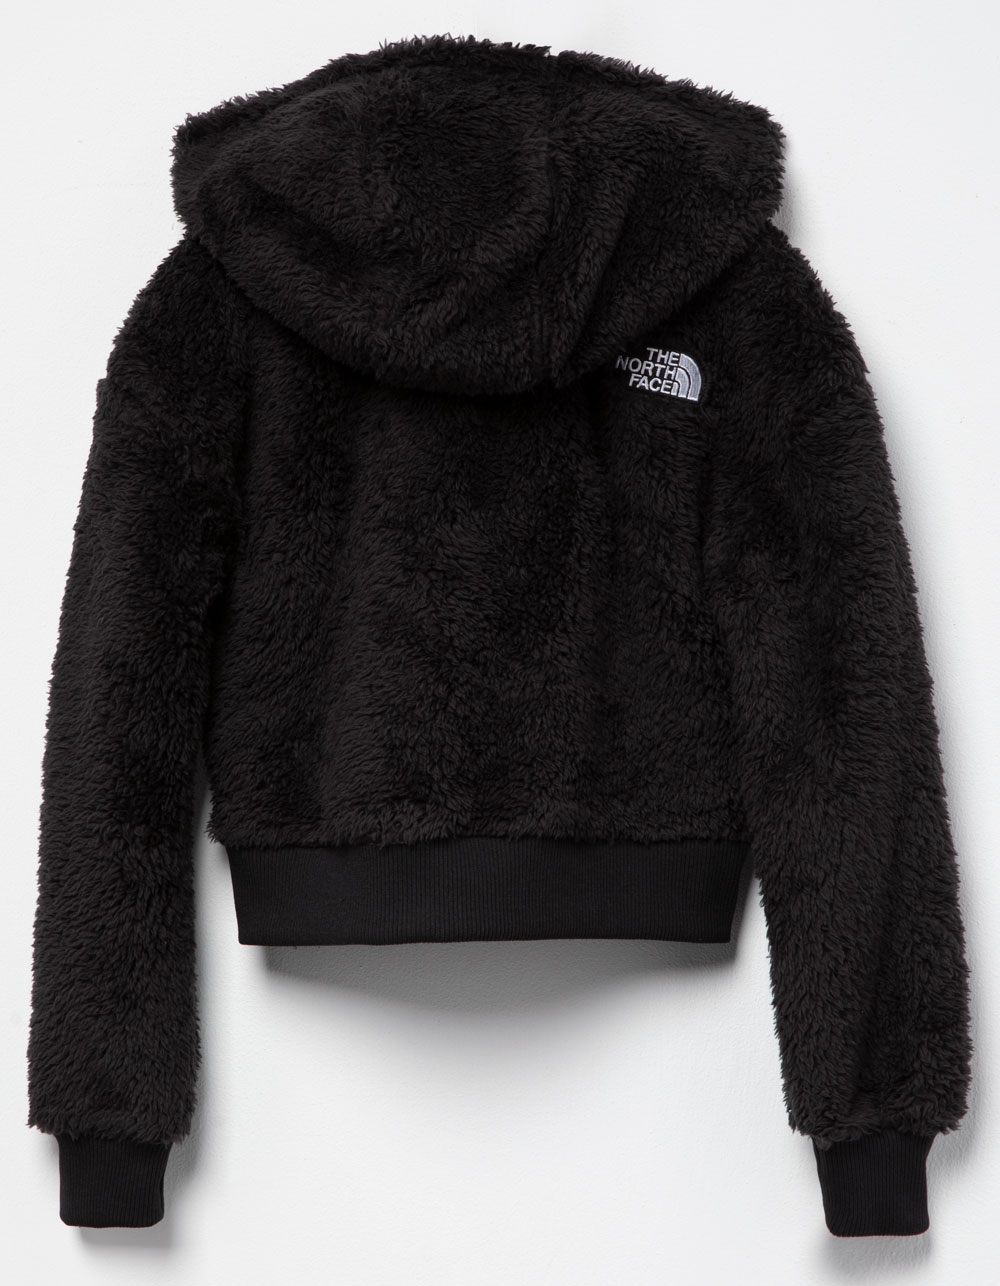 THE NORTH FACE Suave Oso Girls Zip Jacket - BLACK | Tillys